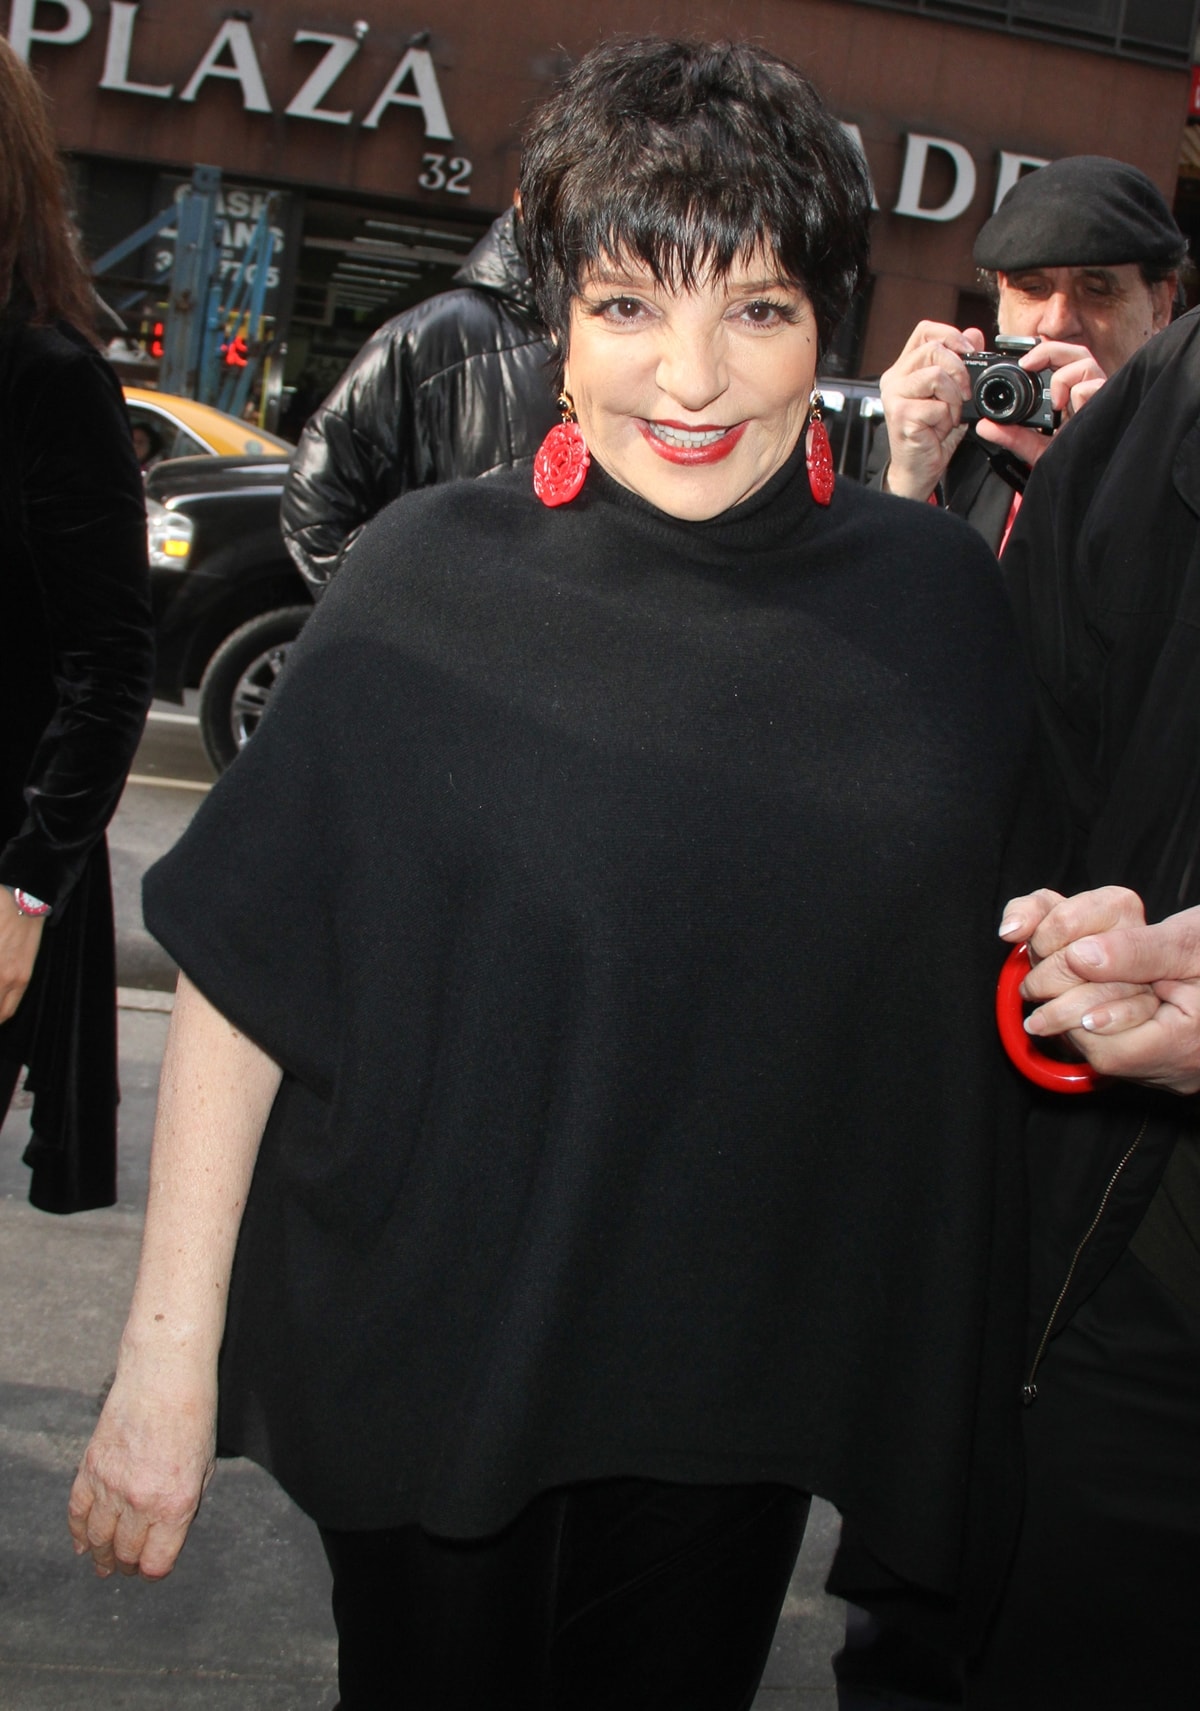 Liza Minnelli has long suffered from alcoholism and has been addicted to prescription drugs